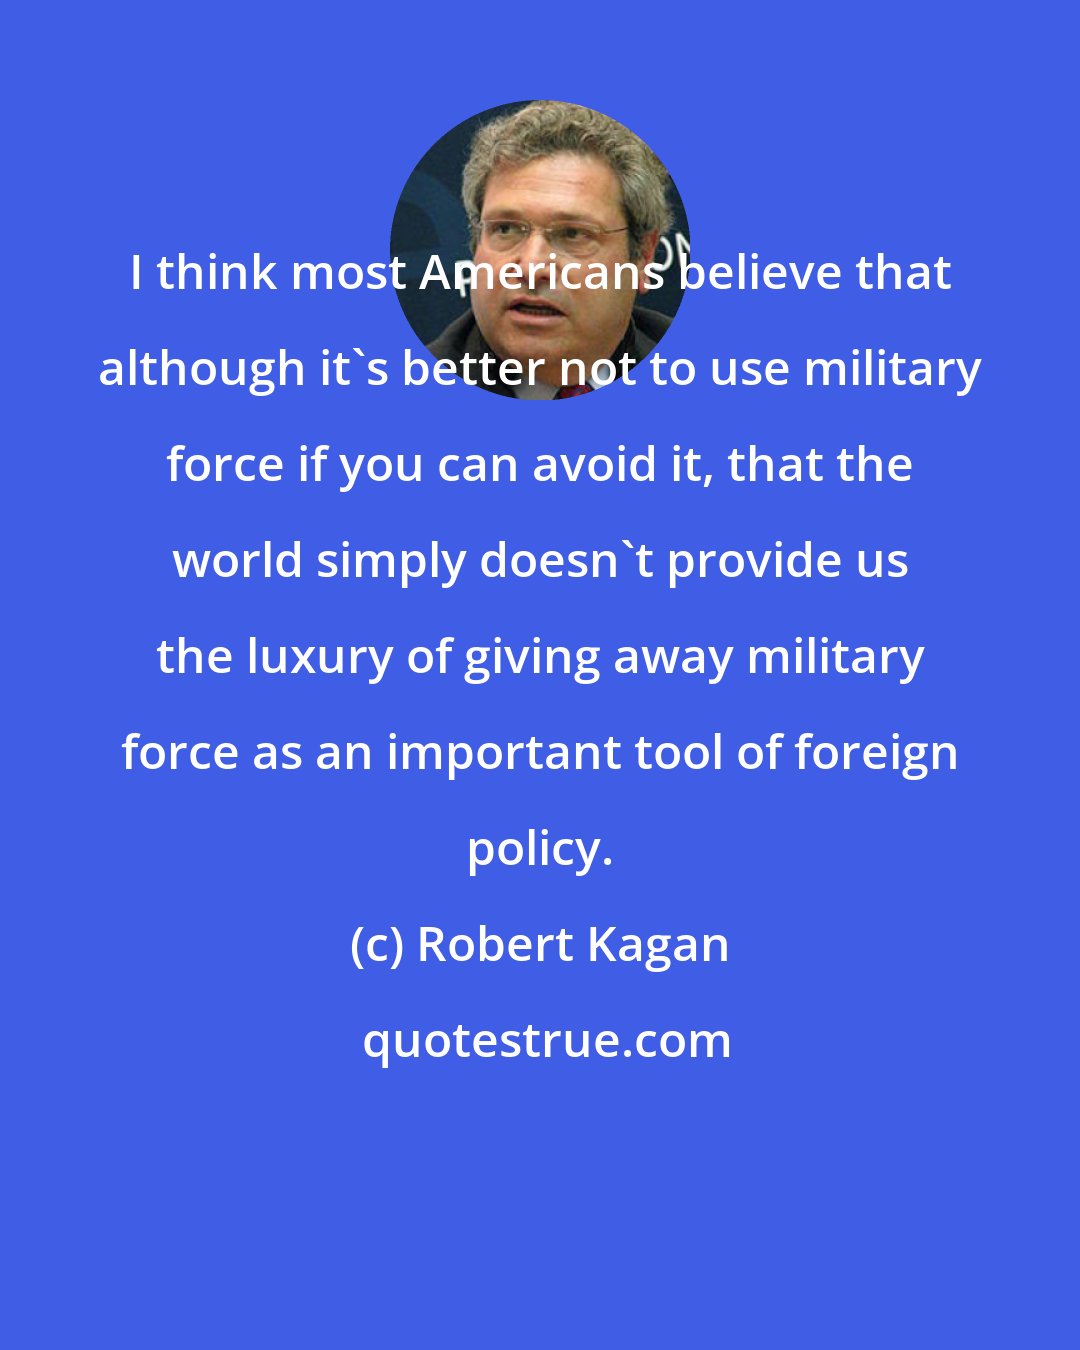 Robert Kagan: I think most Americans believe that although it's better not to use military force if you can avoid it, that the world simply doesn't provide us the luxury of giving away military force as an important tool of foreign policy.